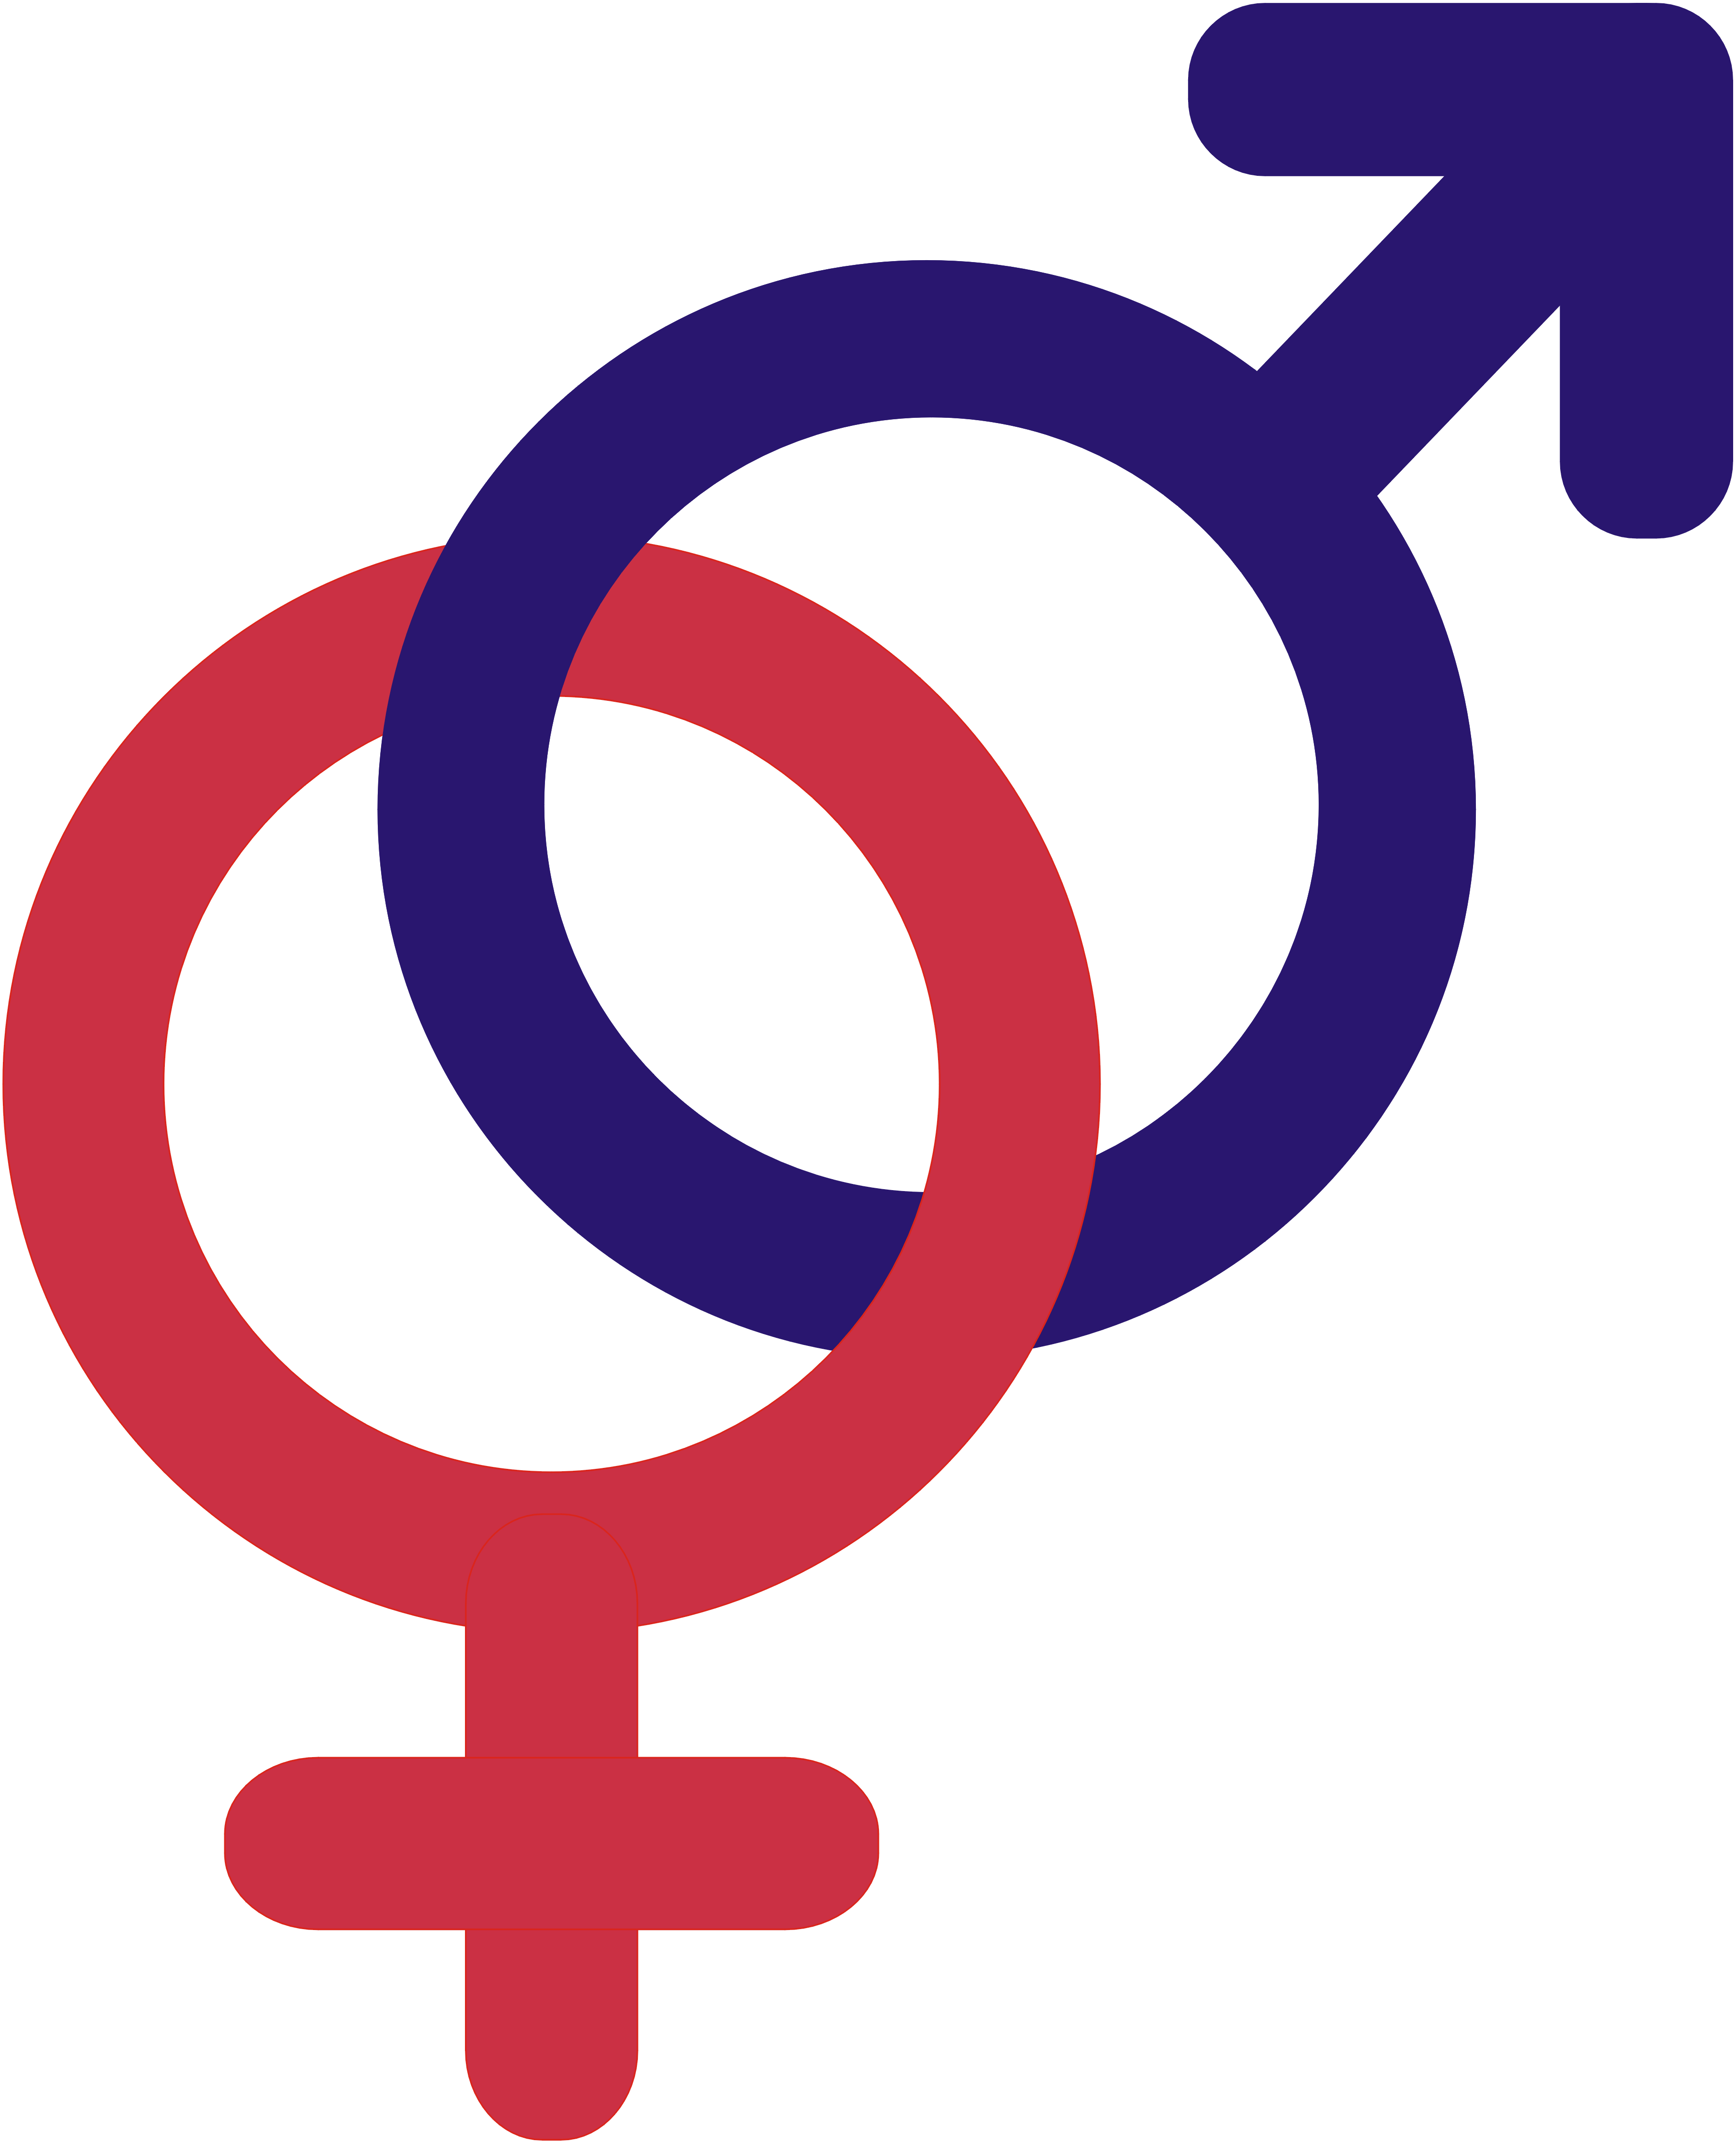 File:Symbols-Venus-Mars-joined-together.png - Wikipedia, the free